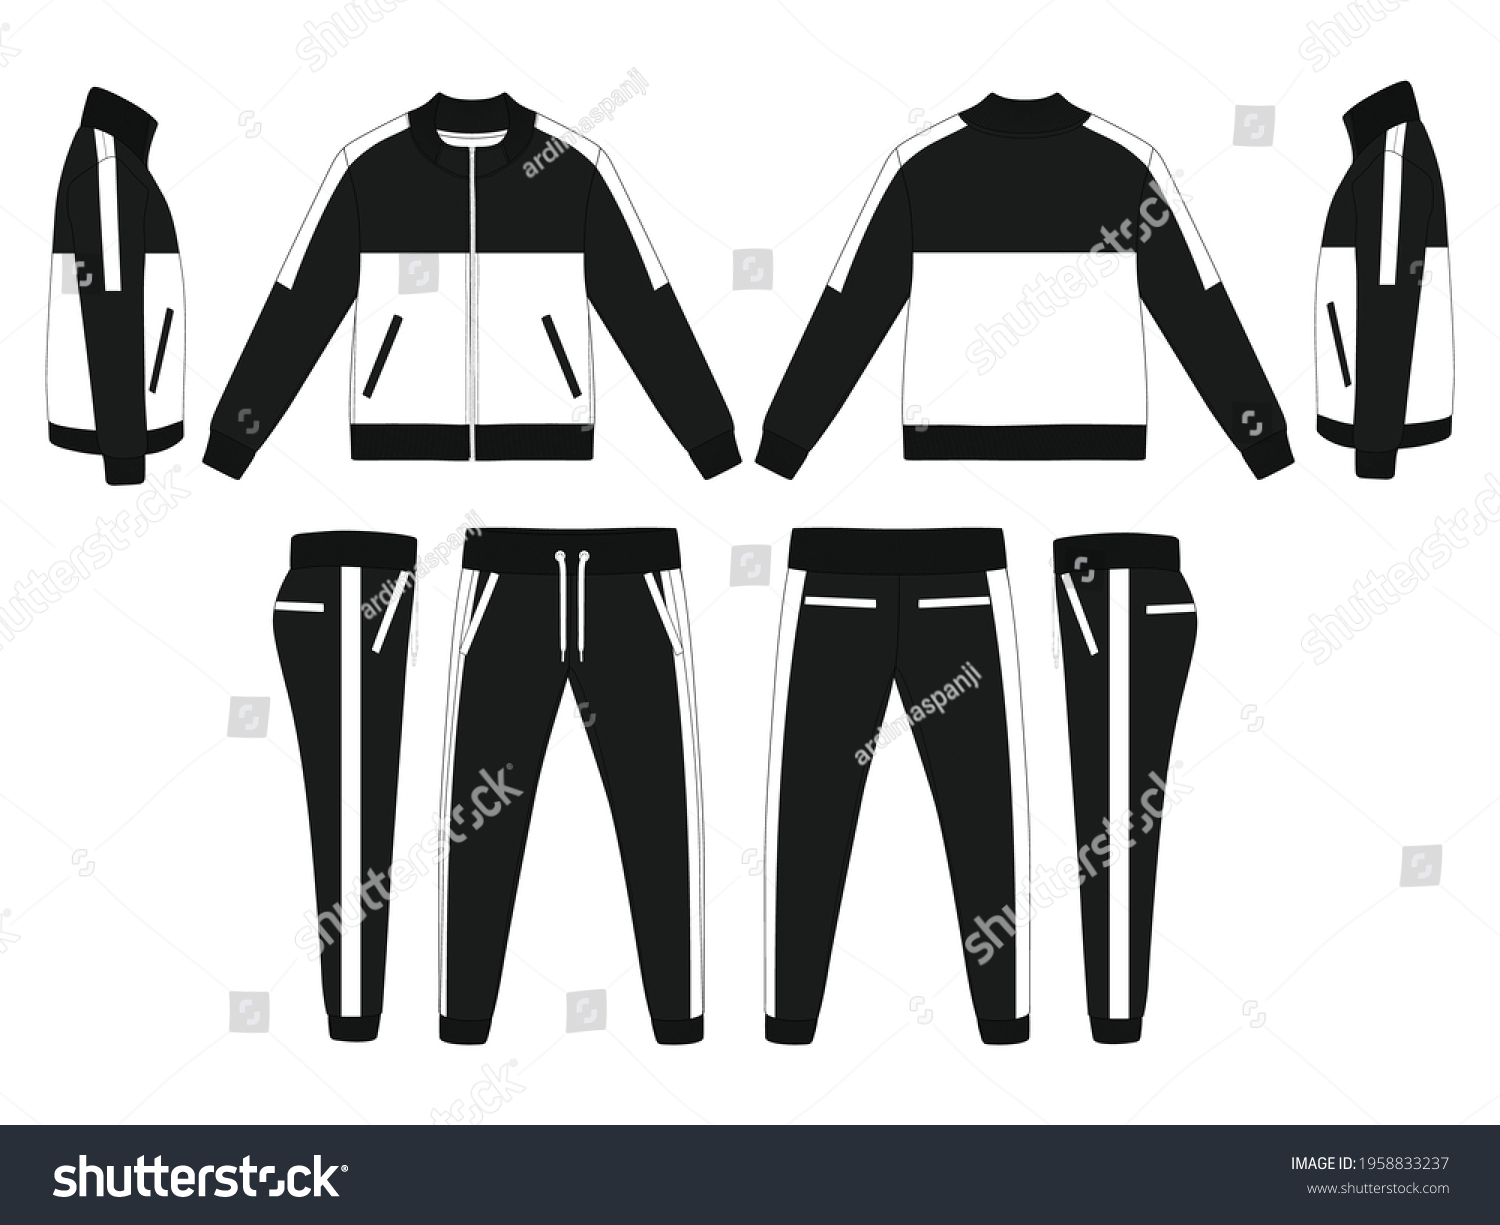 SVG of Tracksuit, Modern and Minimalist Style Design, Black and White, Commercial Use svg